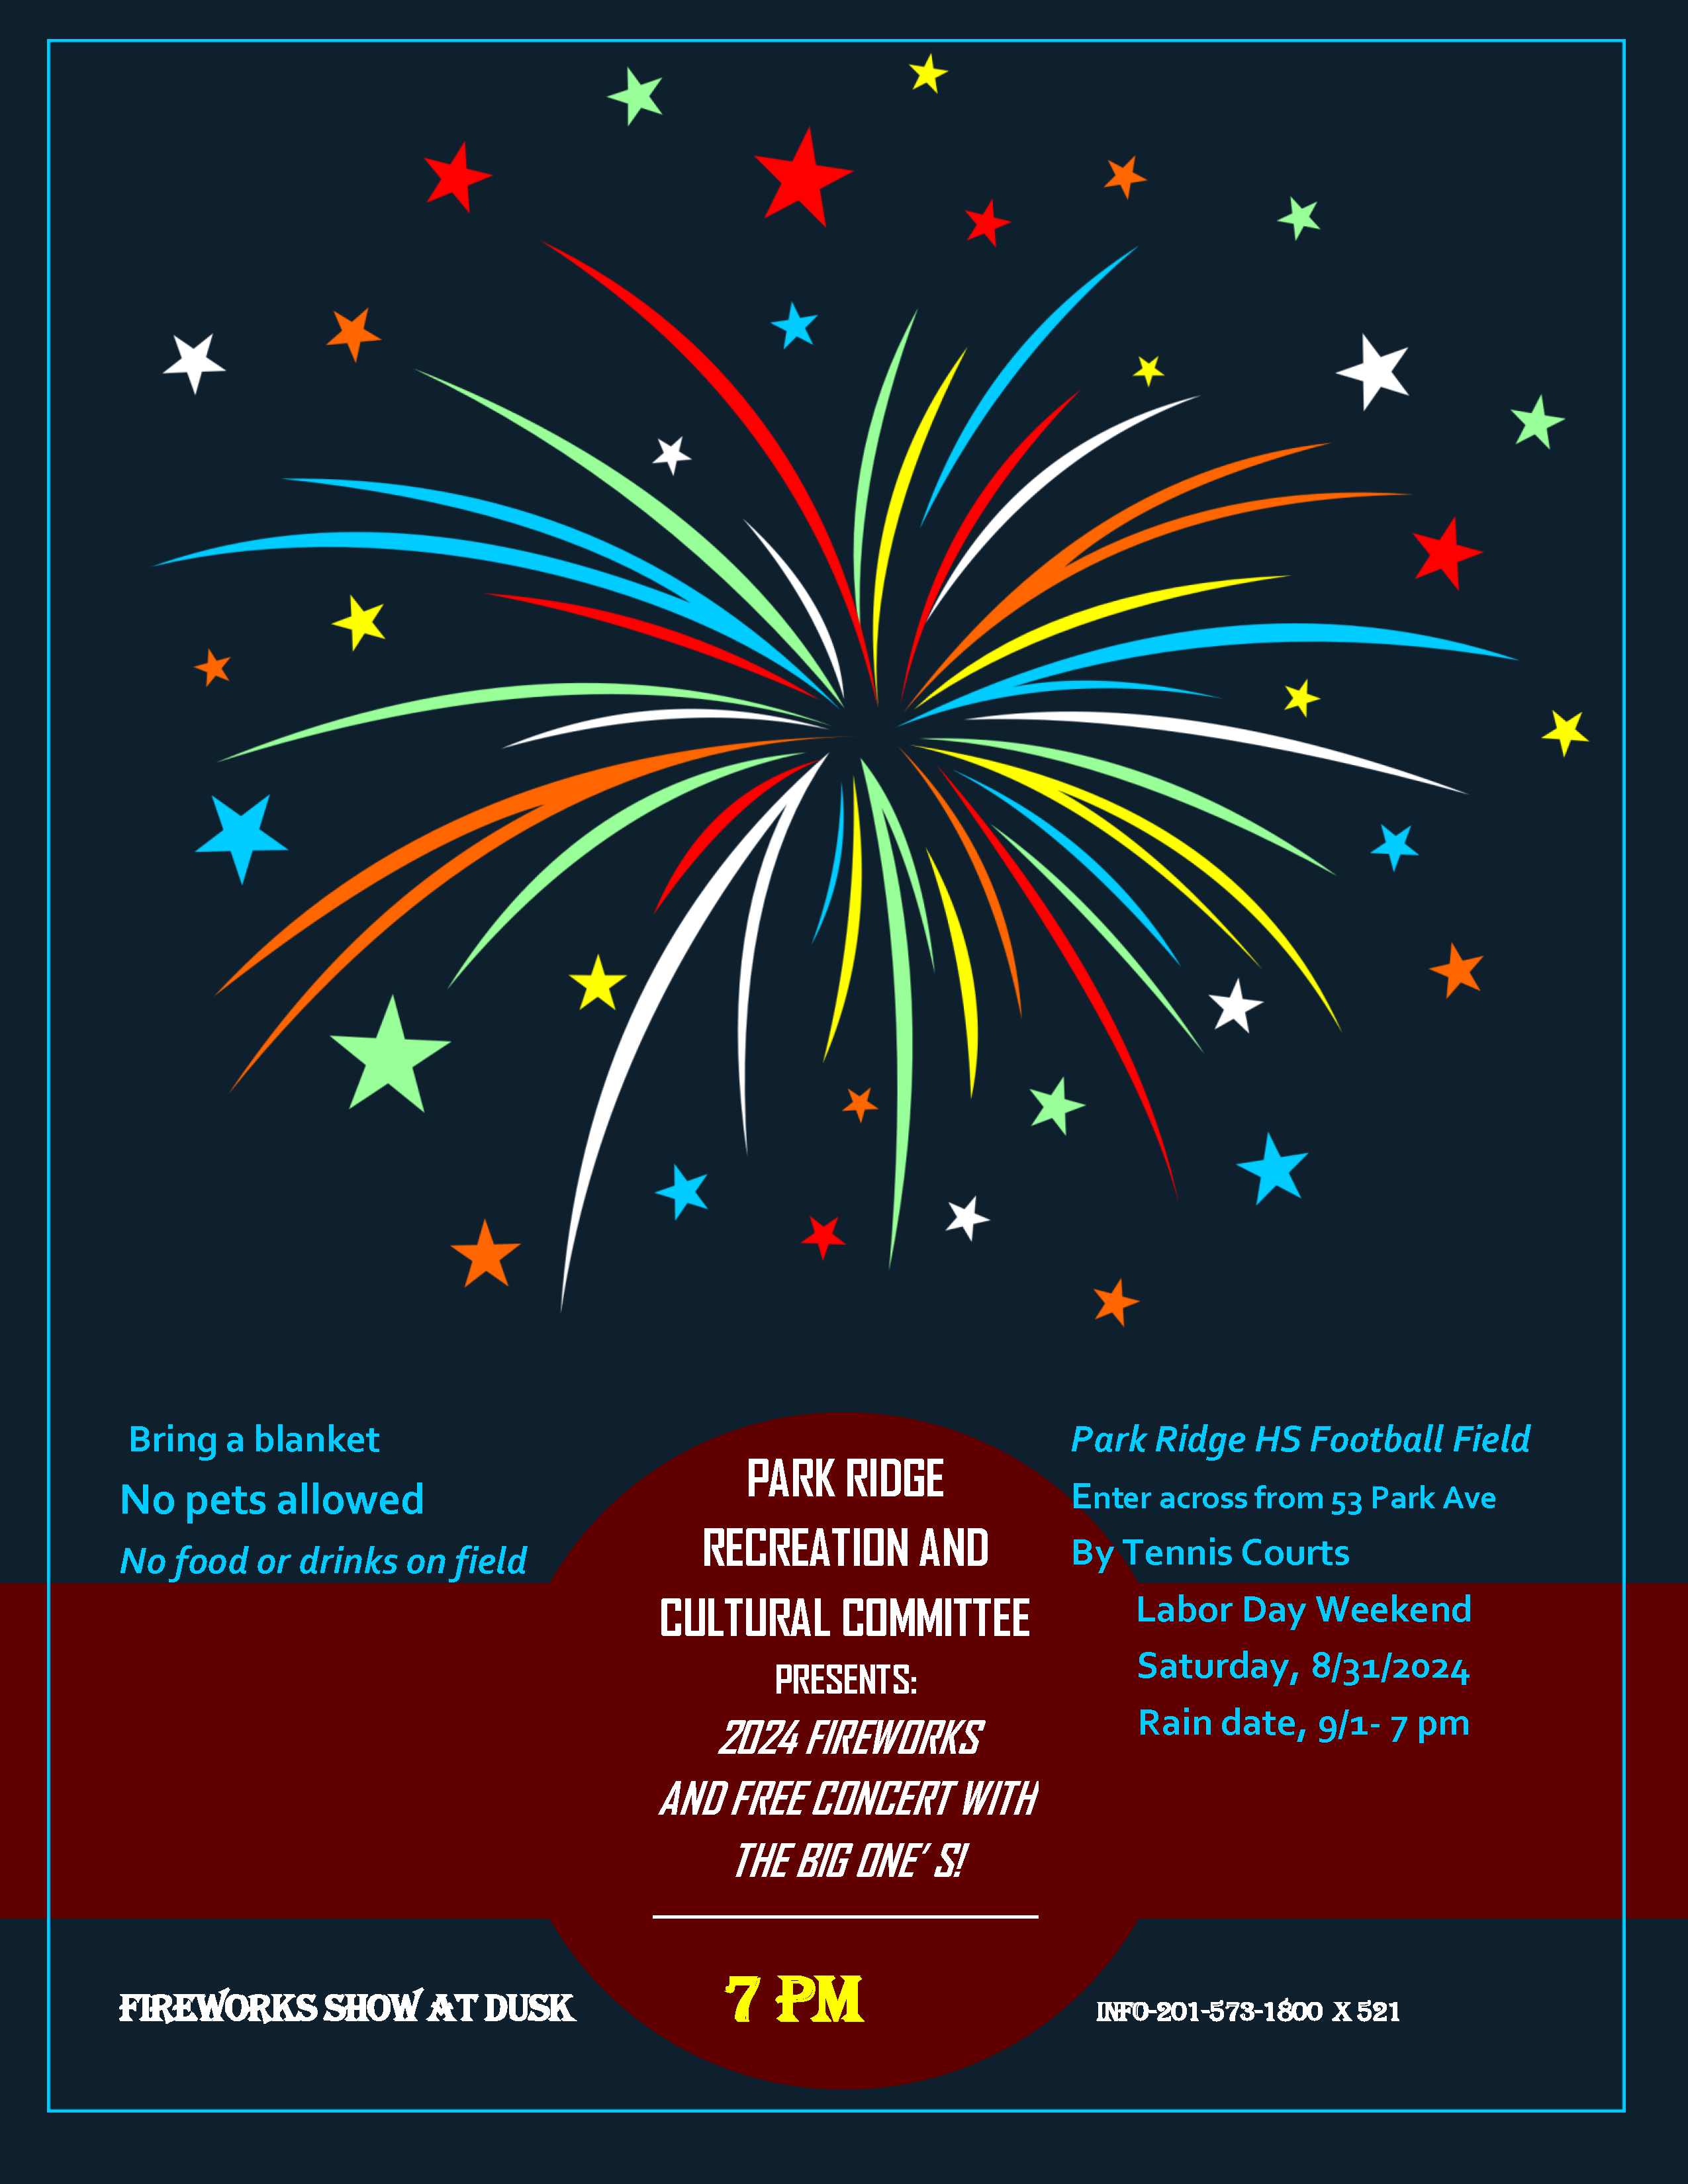 2024 Fireworks event flyer. Click to open an OCR scanned PDF version.